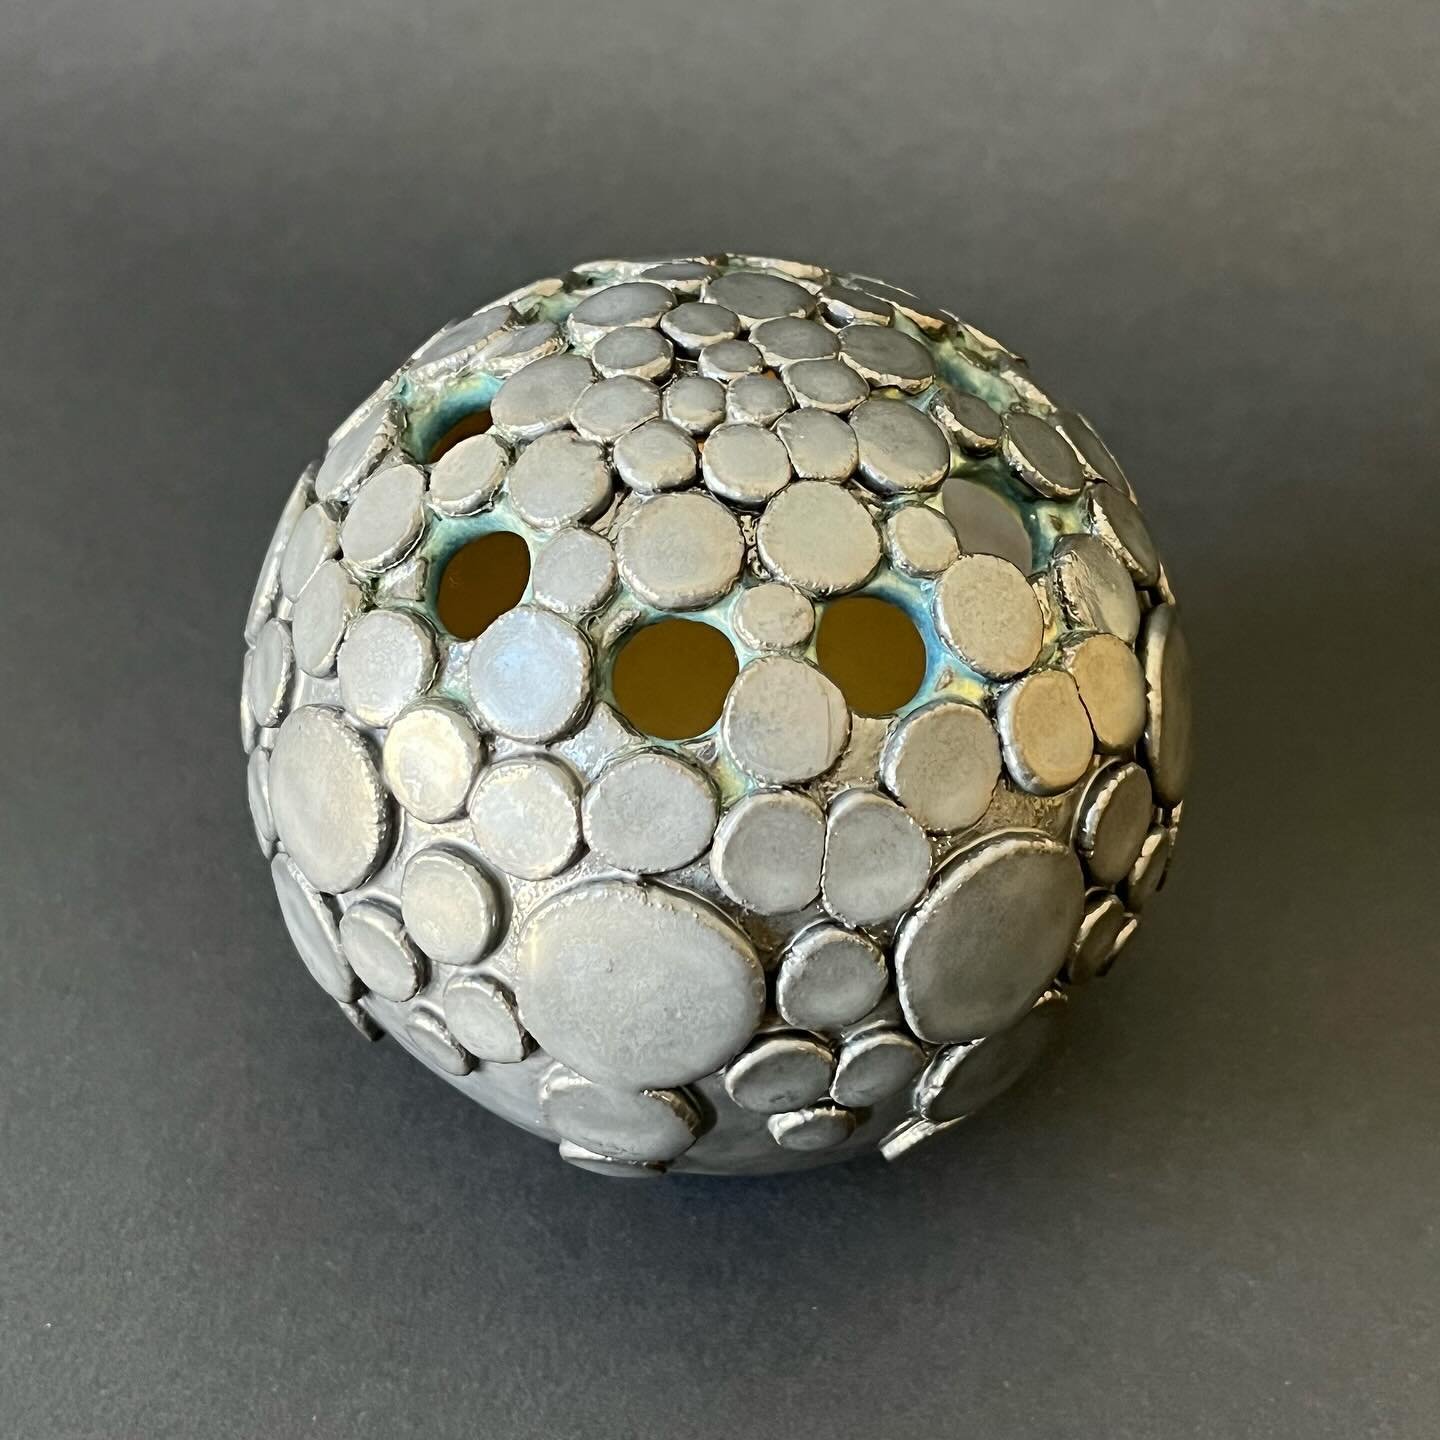 Making art sometimes feels like remembering a language I haven&rsquo;t spoken in a while. Although this new metallic-glazed 3.75&rdquo; vessel seems a little different than my recent work, I realized I started creating texture from pressed discs at l